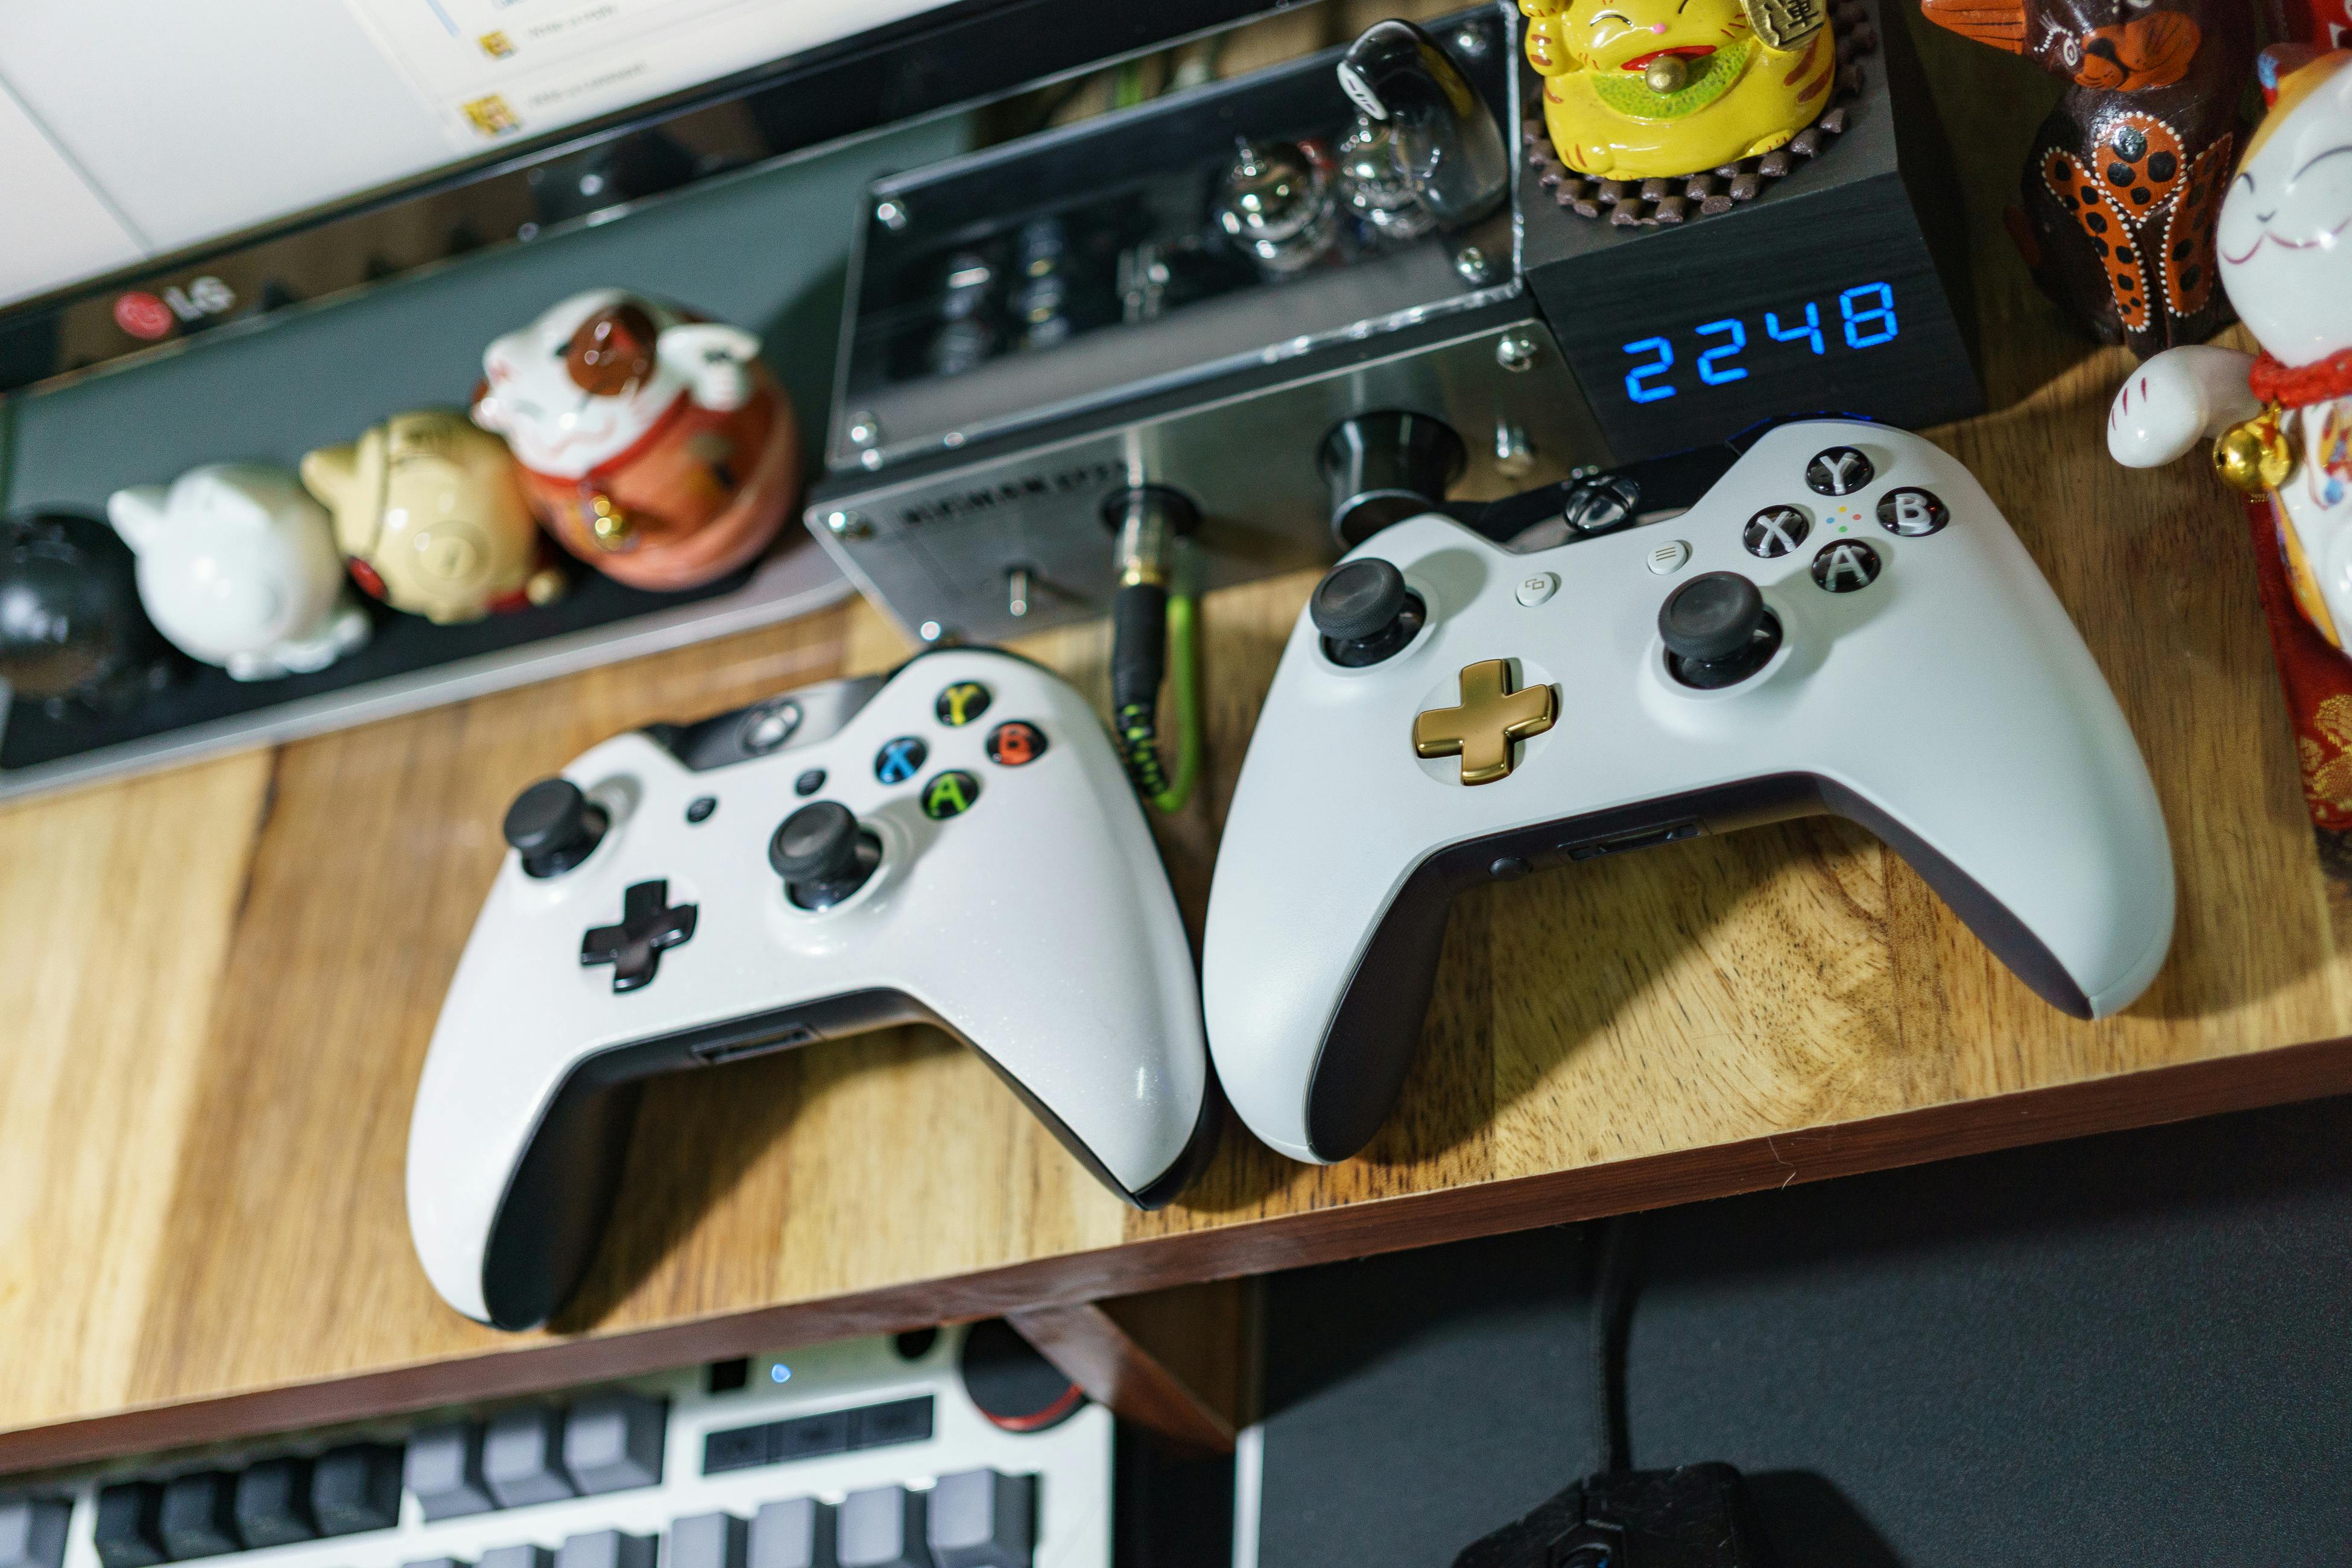 White Sony Ps4 Dualshock Placed on Table \u00b7 Free Stock Photo